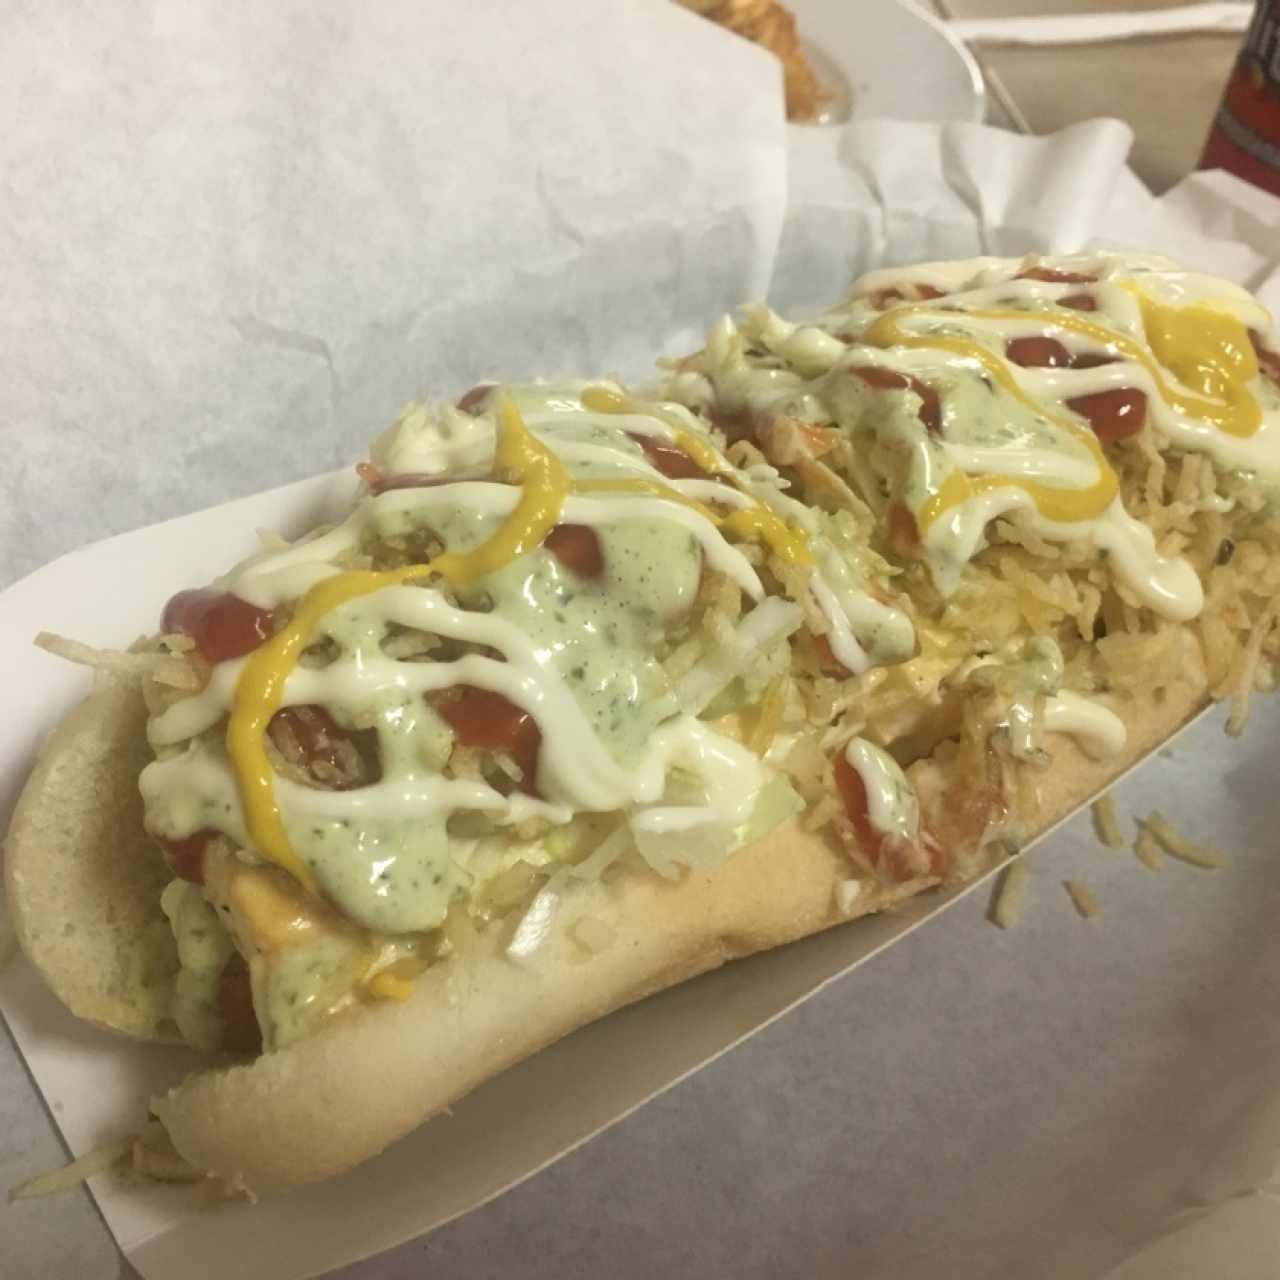 Hot Dogs - Salchiqueso